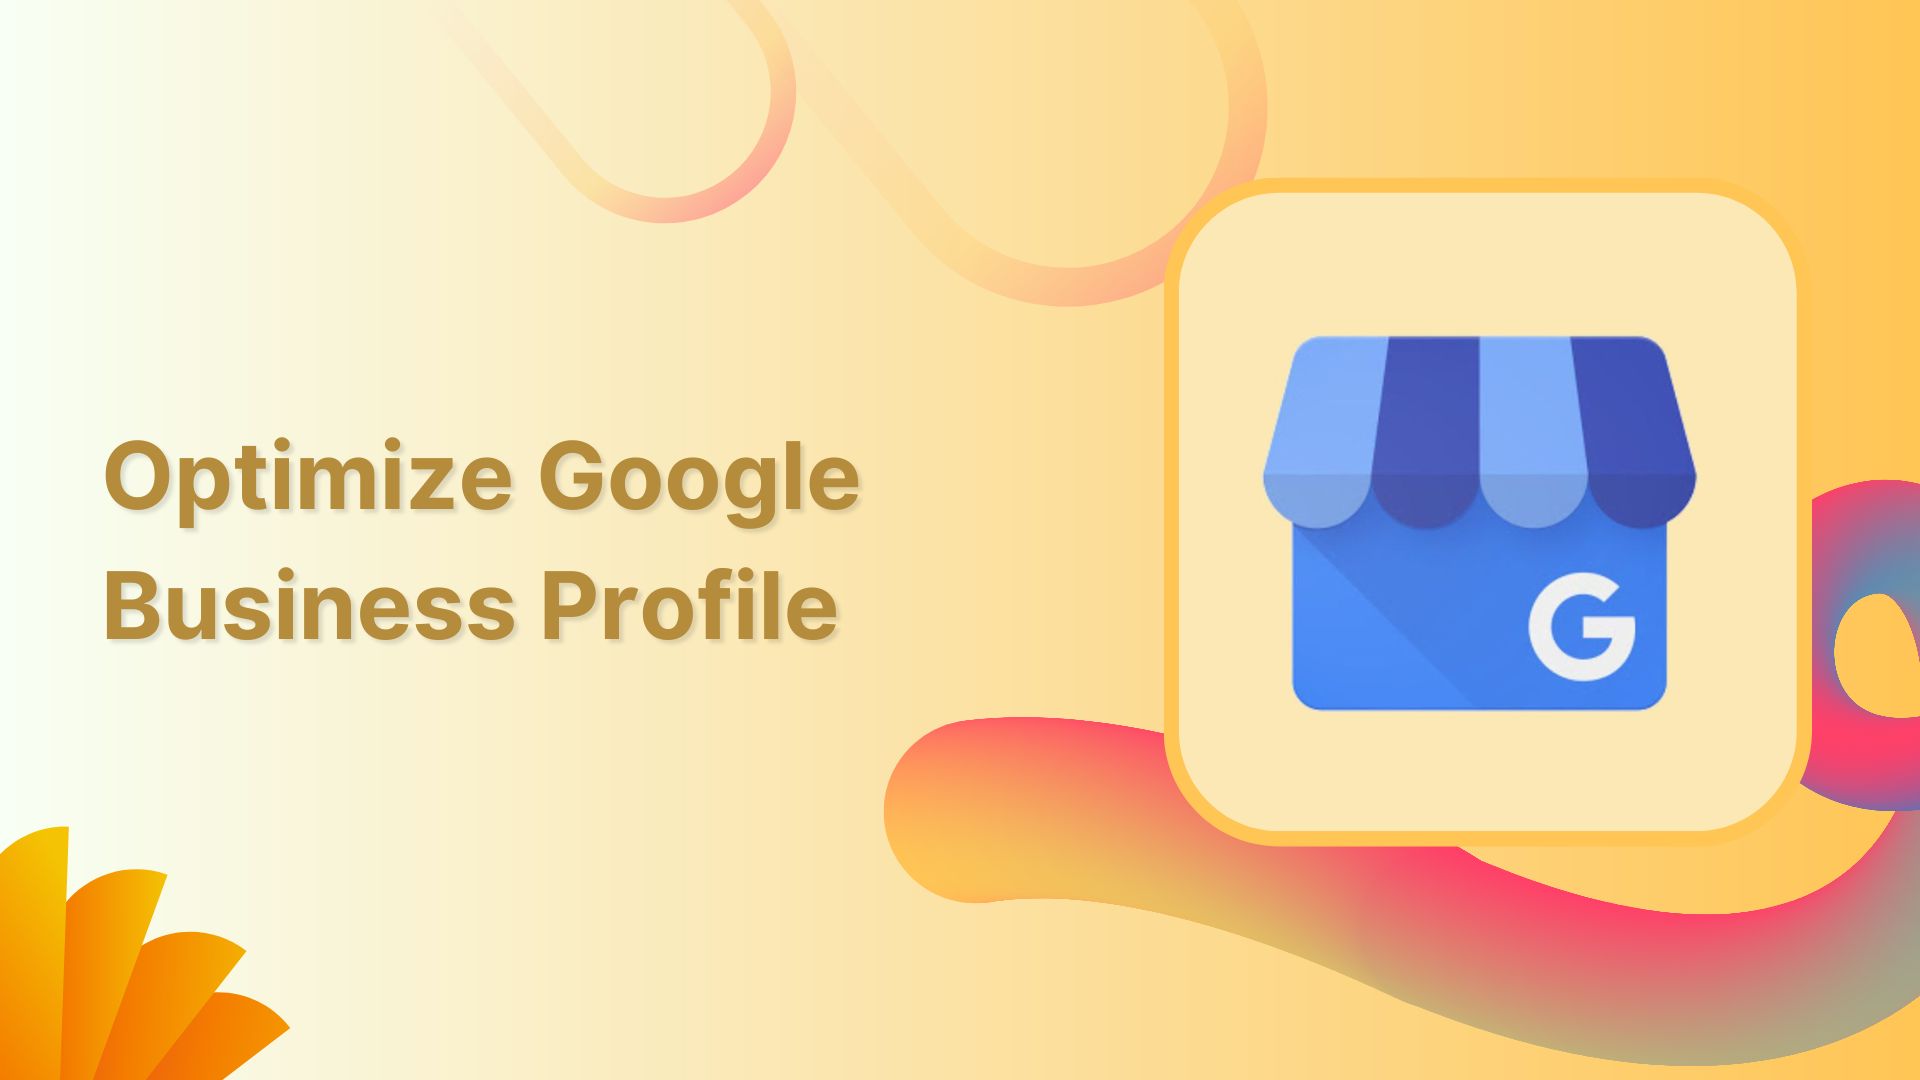 How to Optimize your Google Business Profile